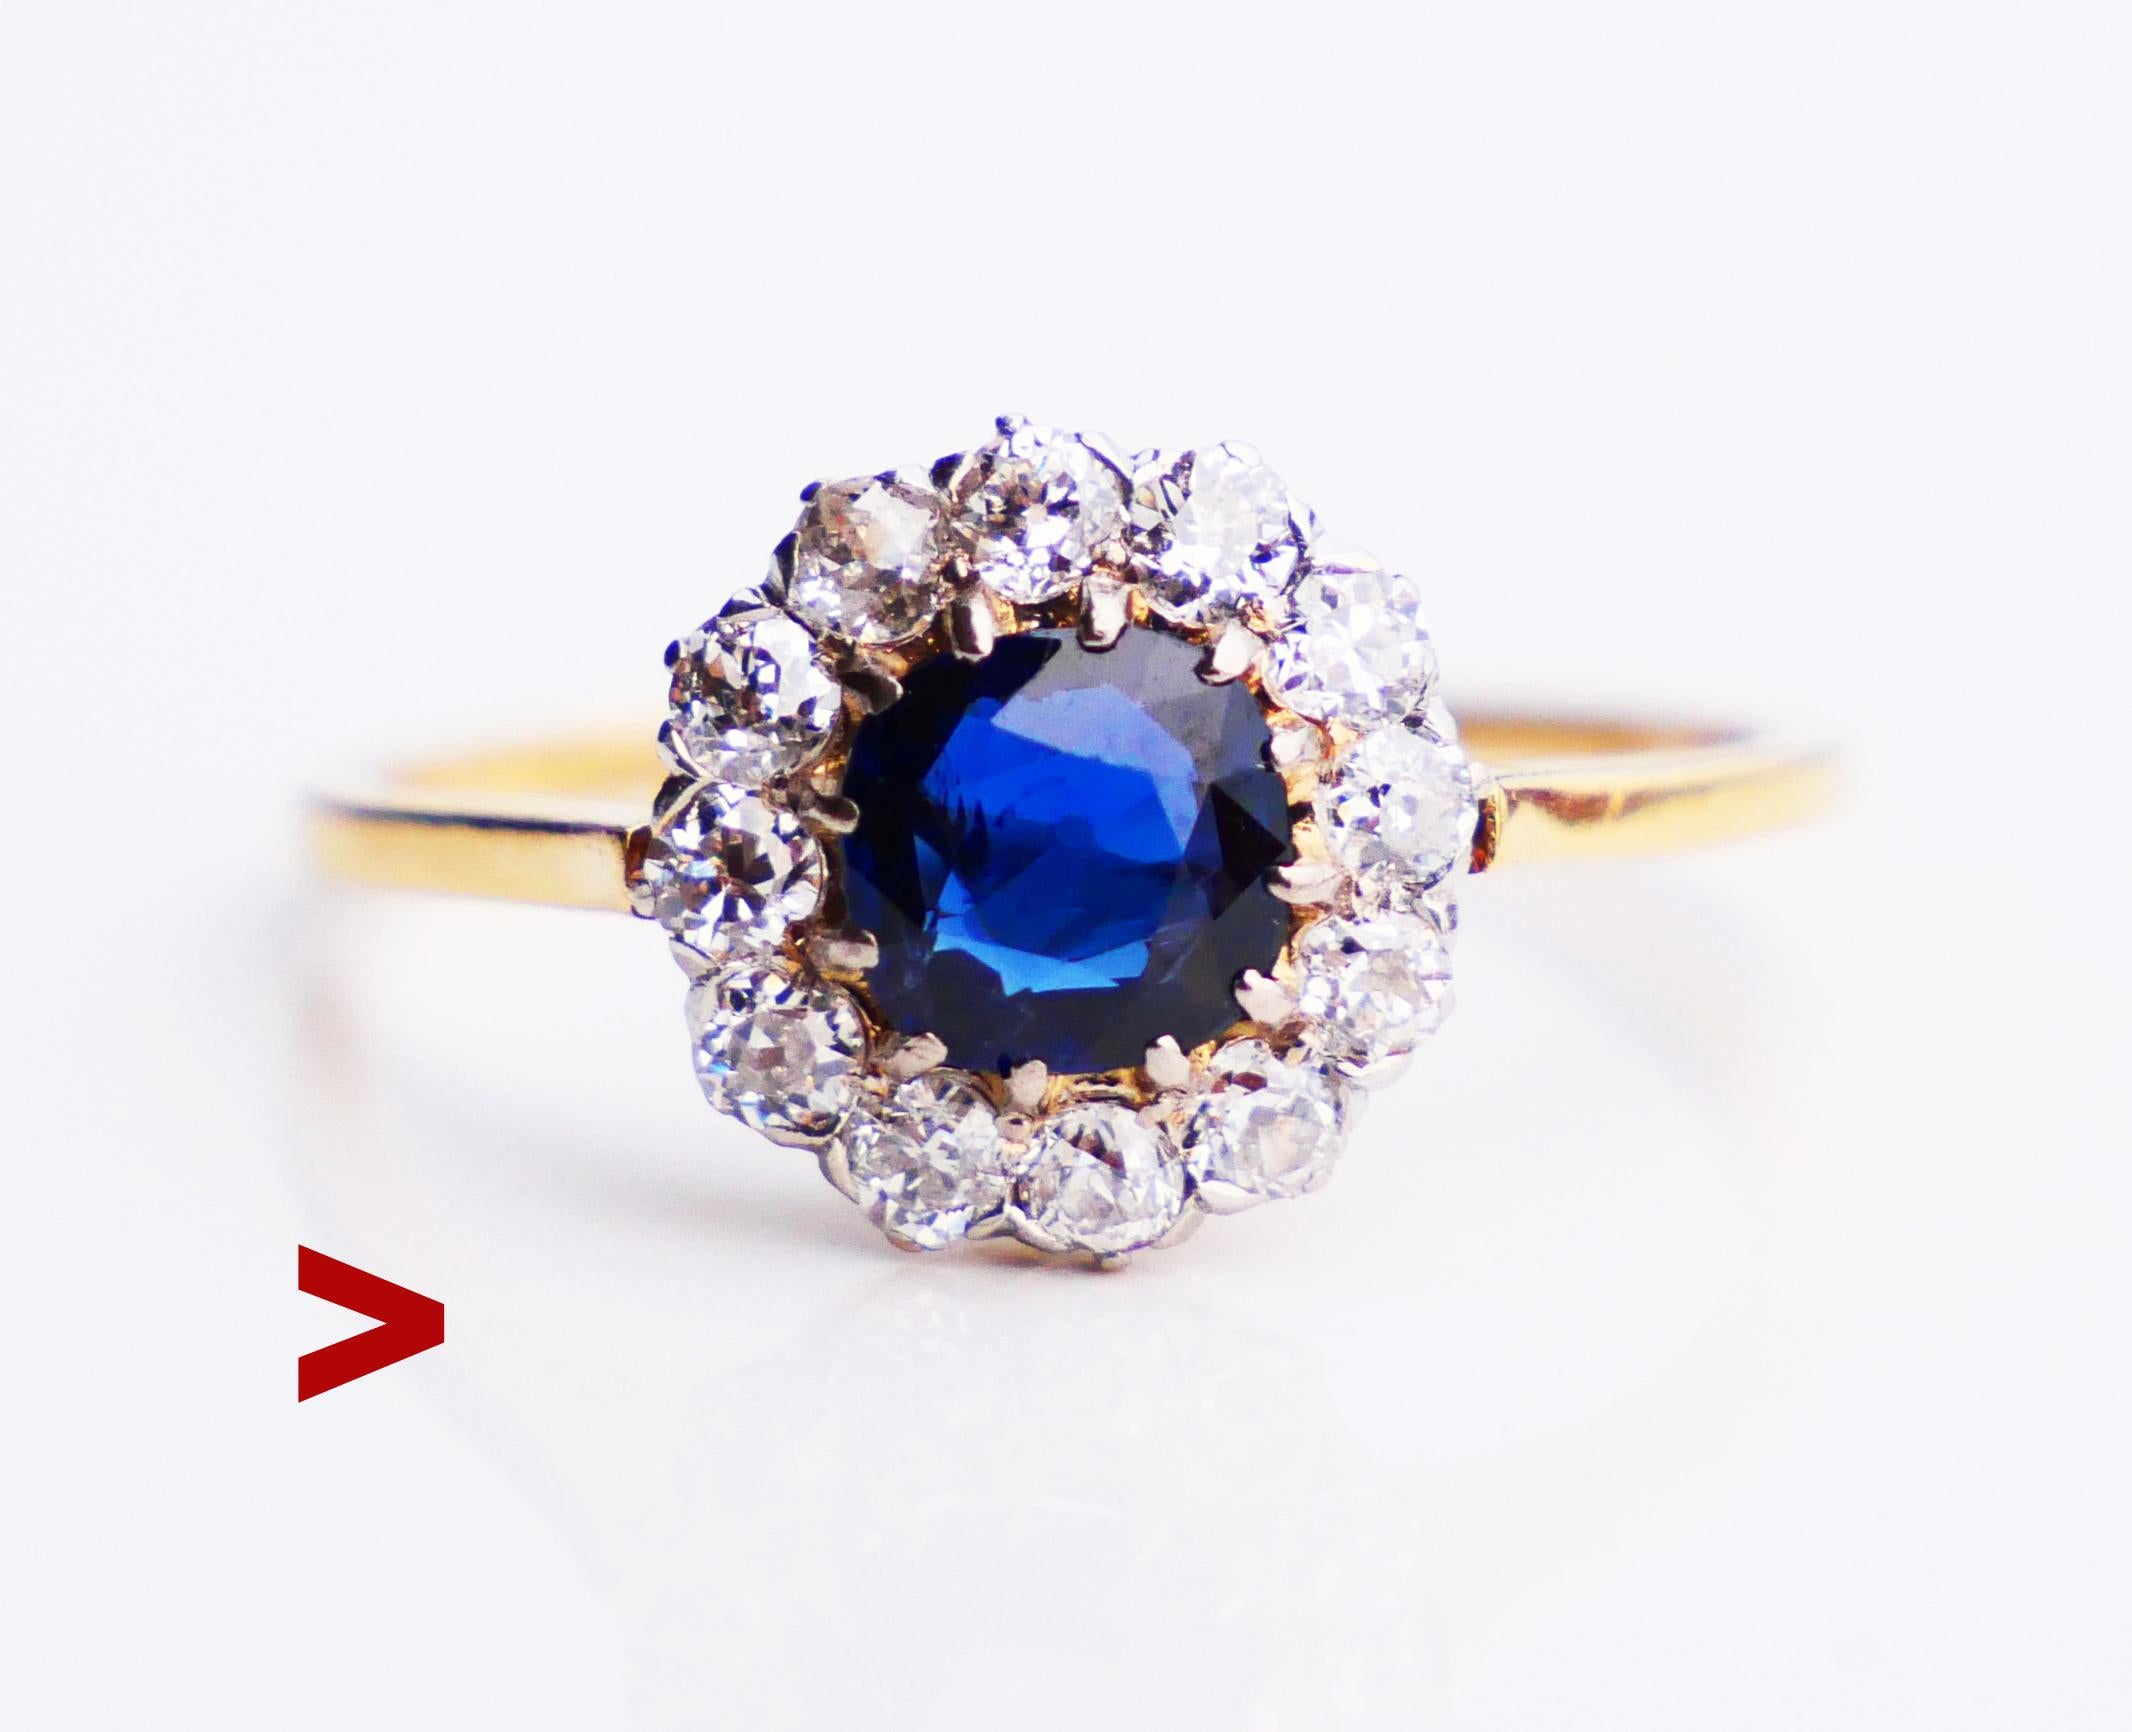 Old Nordic Halo Ring in solid 18K Yellow Gold with natural Blue Sapphire and 12 old European cut Diamonds in Platinum settings. Hallmarked 18K, Swedish Ring. No year marks, made ca. 1920s -1930s. I have several rings of similar design, just check my